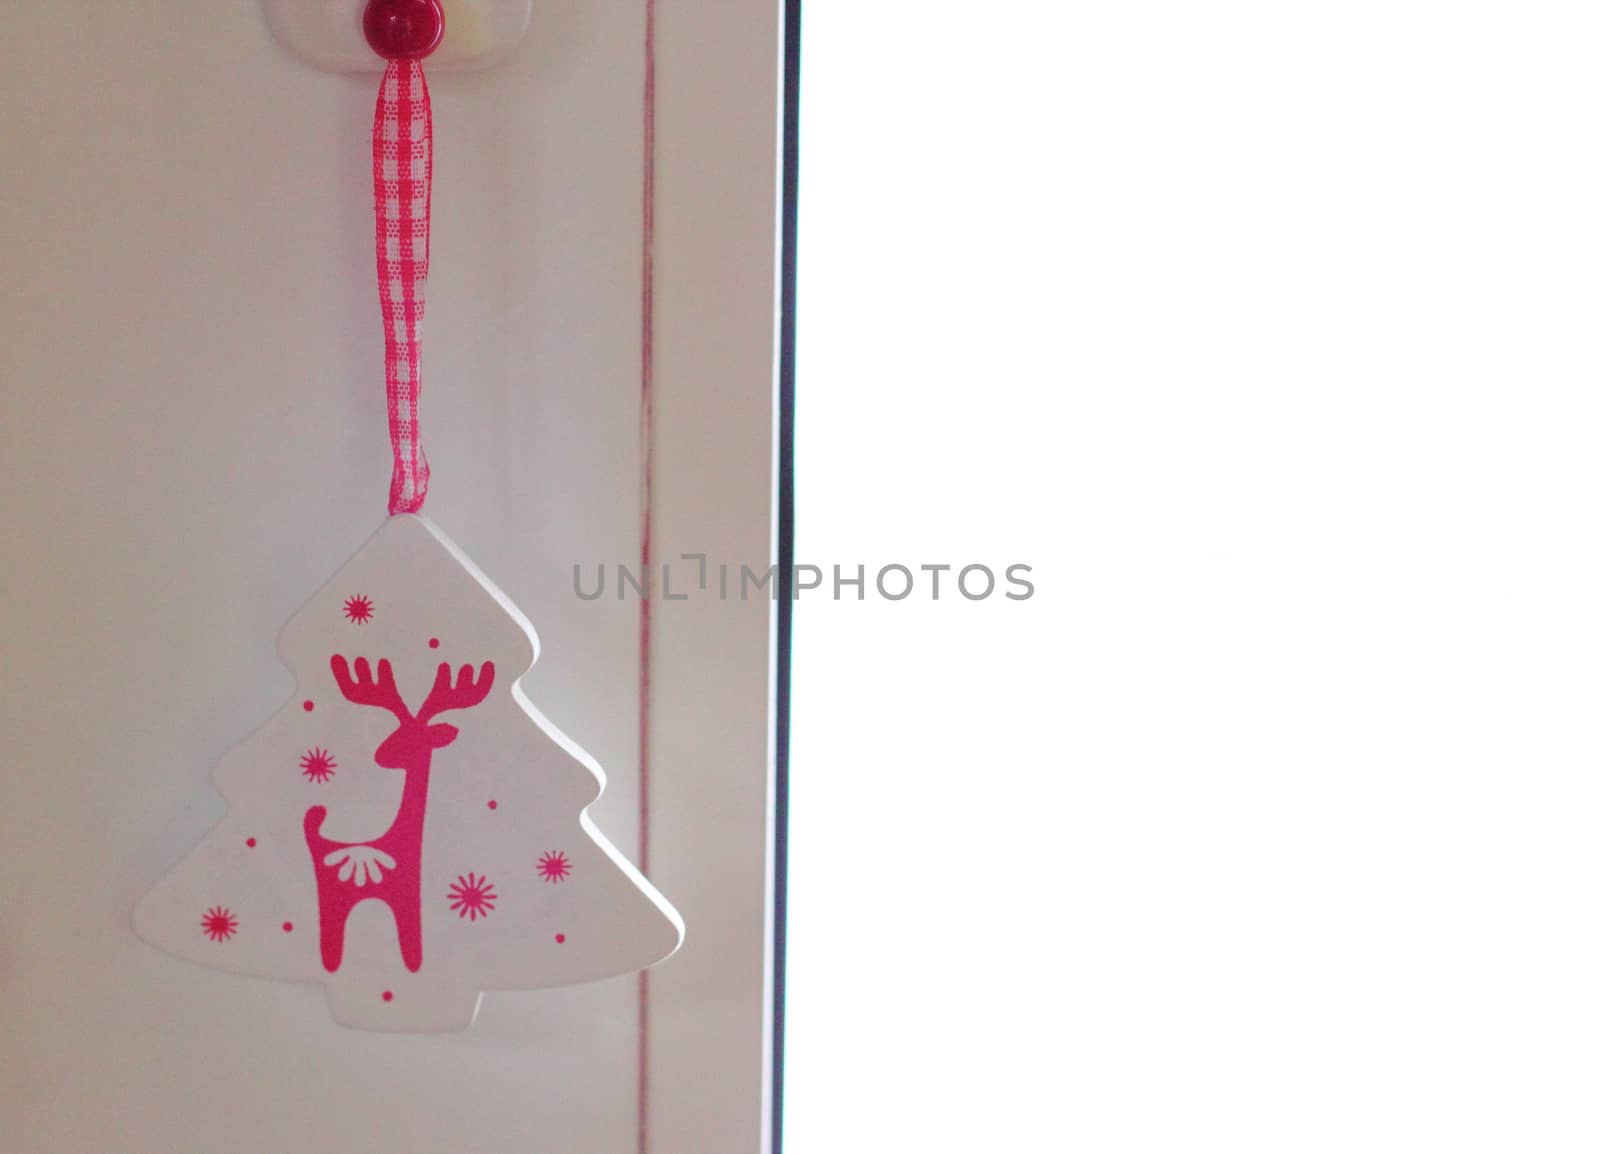 Toy Christmas Tree with a deer. Wooden, red and white colors